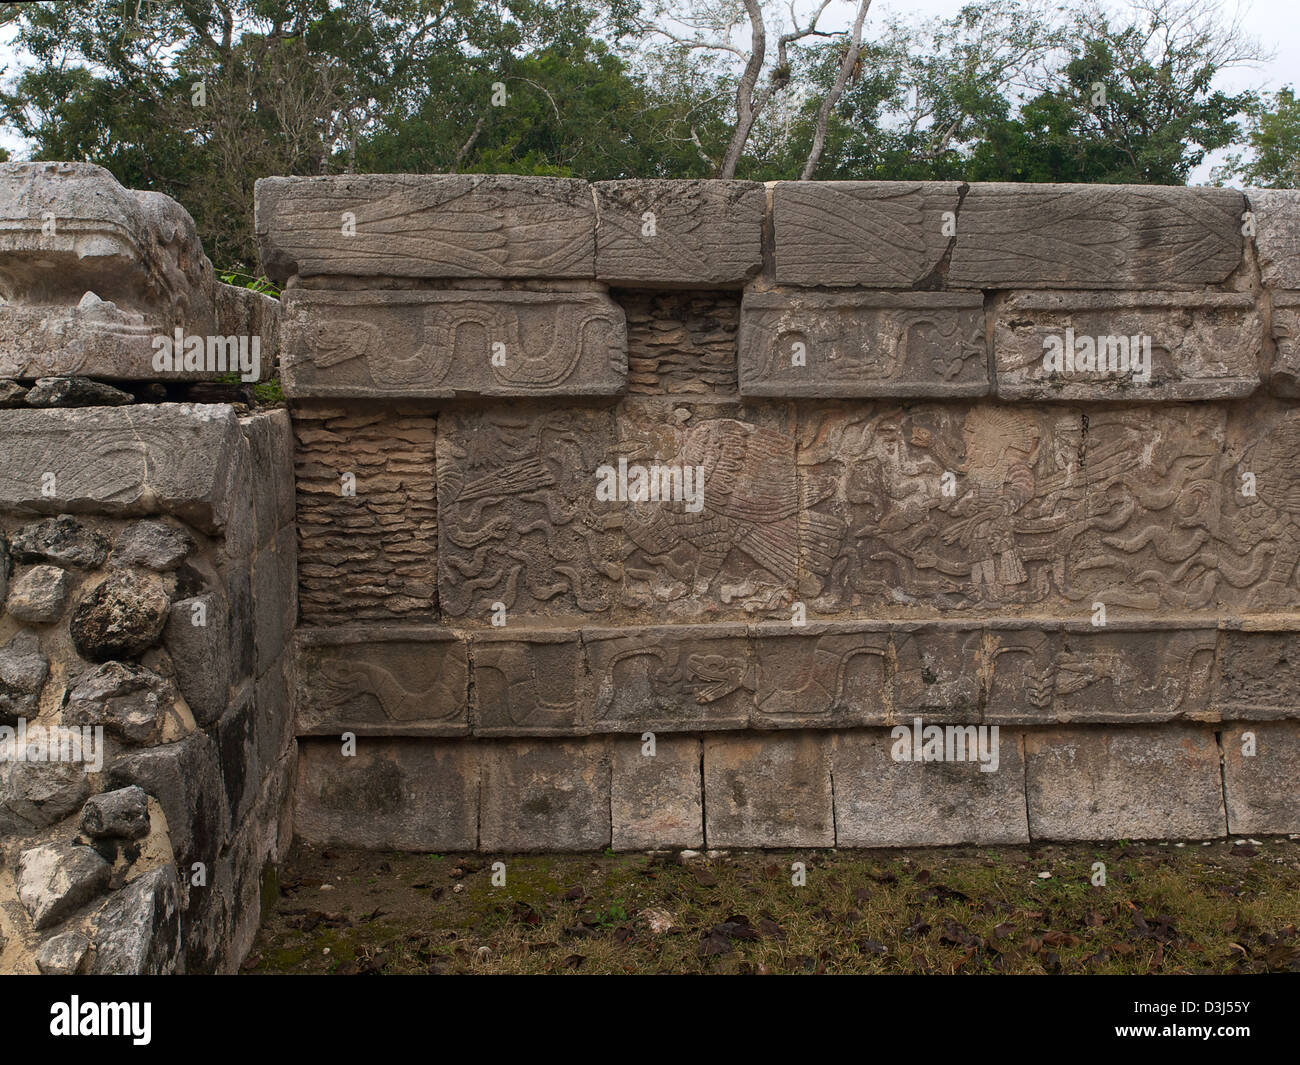 The bas-relief on the wall of the ritual sites in Chichen - Itza Stock Photo